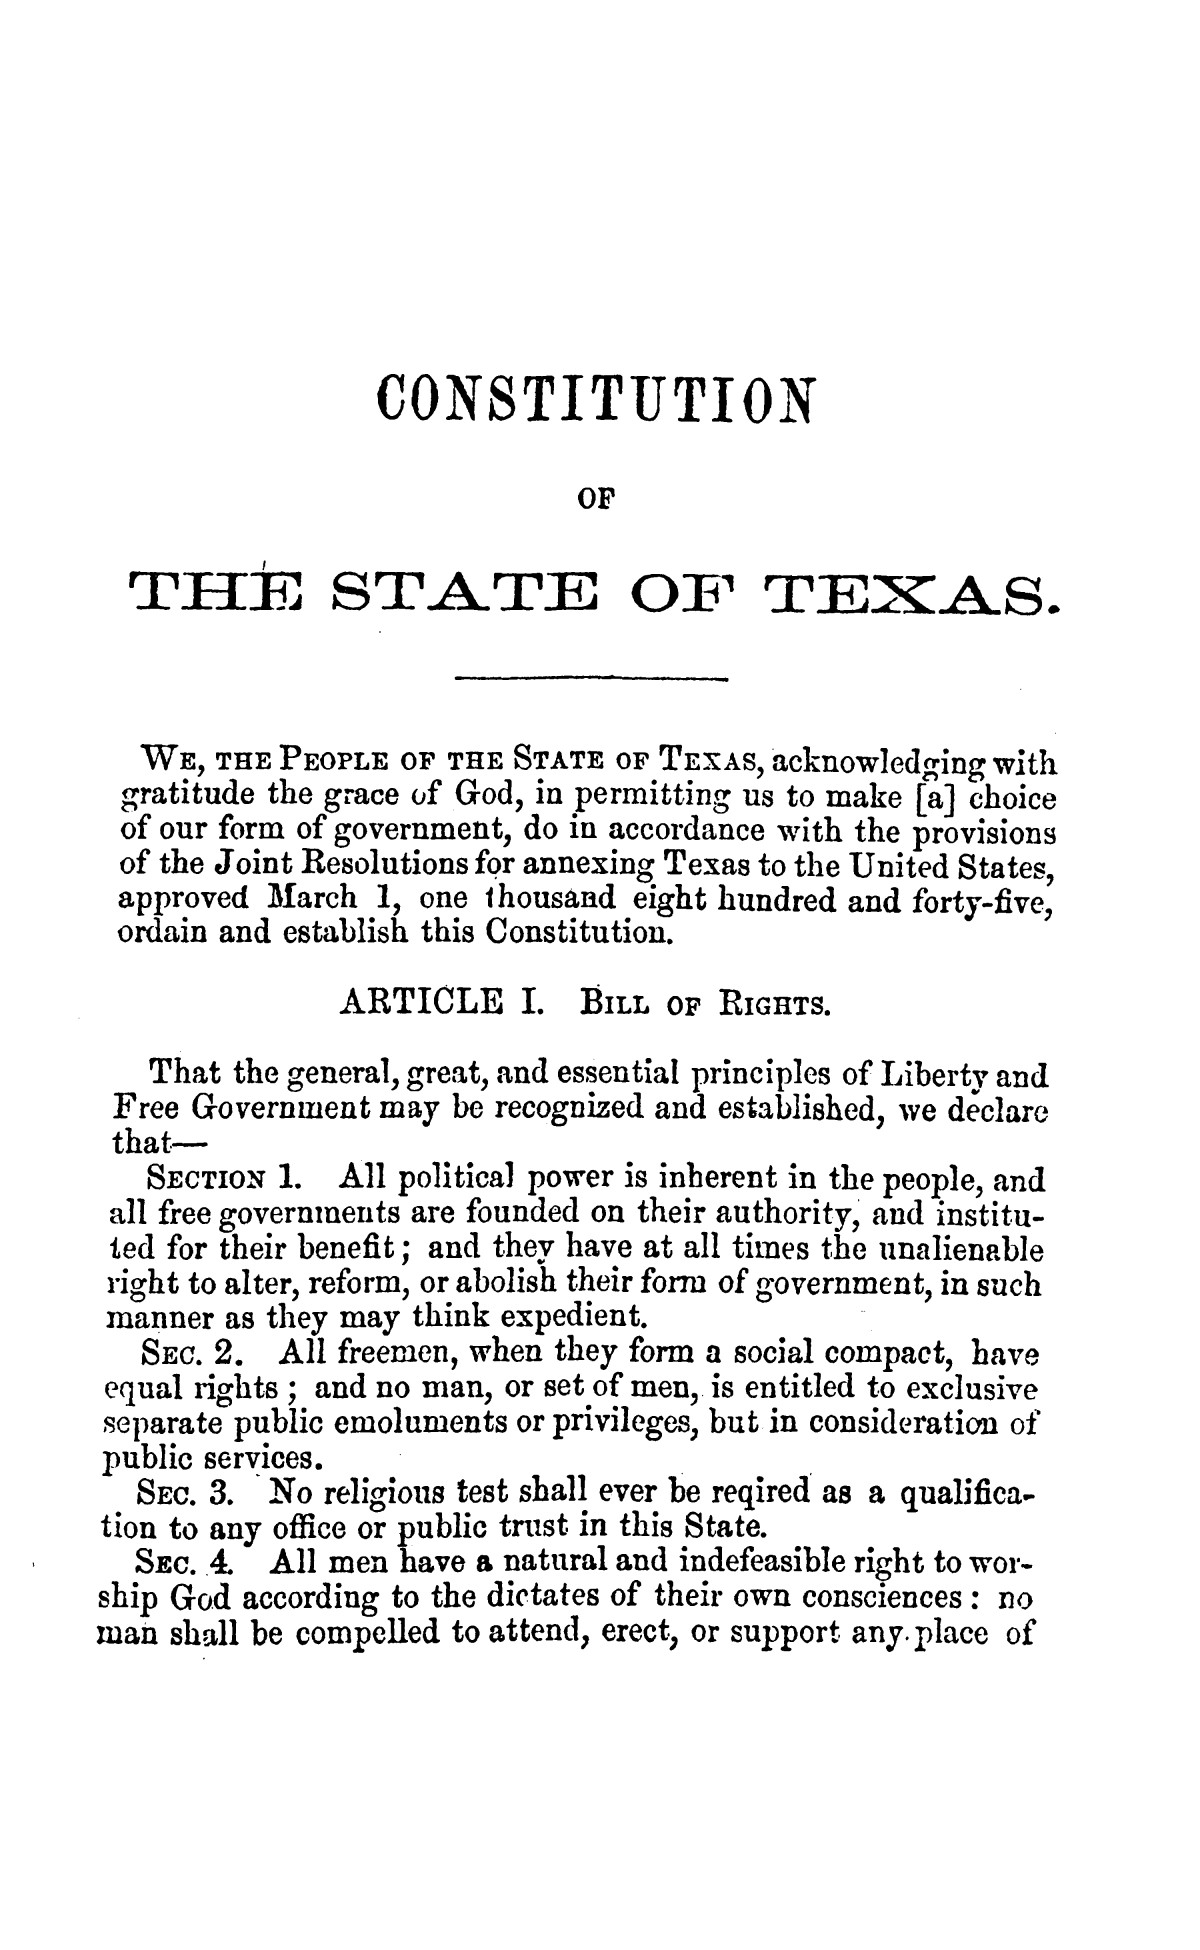 The Constitution of the state of Texas. The Portal to Texas History